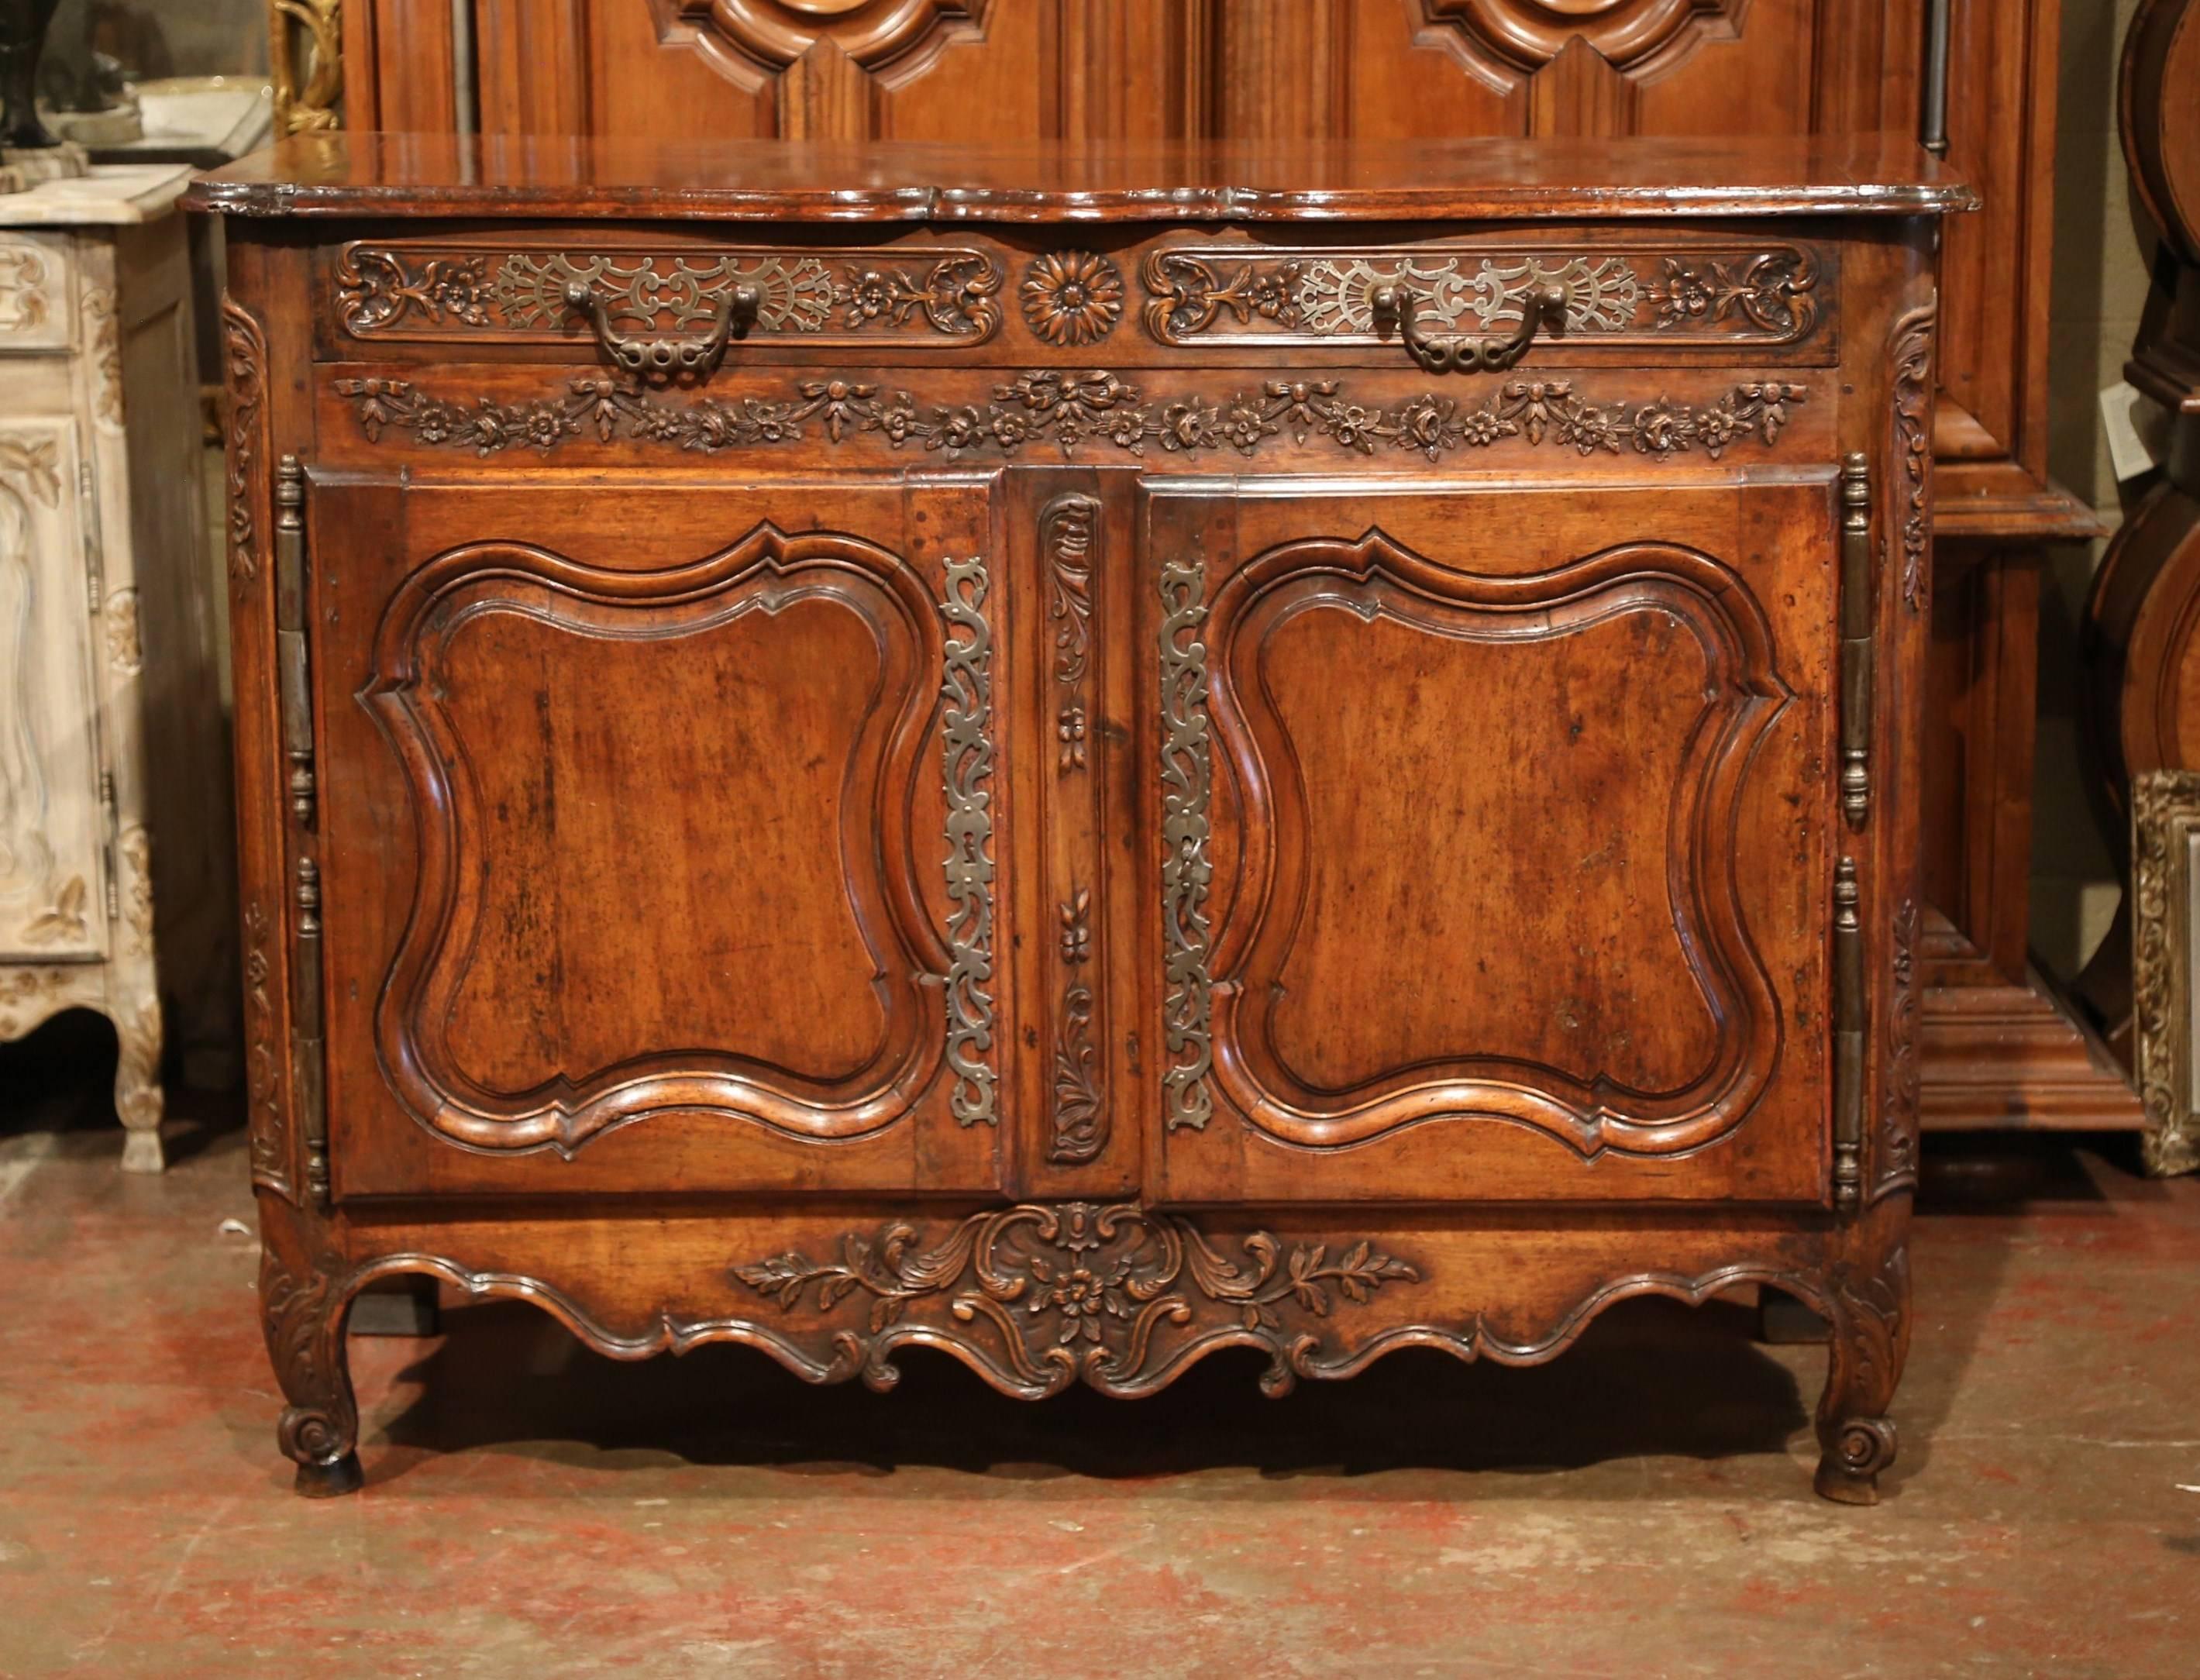 This elegant, antique fruitwood buffet was carved in Southern France, circa 1760. The Classic cabinet exemplifies the Louis XV style with a heavy presence, beautiful lines and intricate carvings. The cabinet has a long hand carved drawer across the